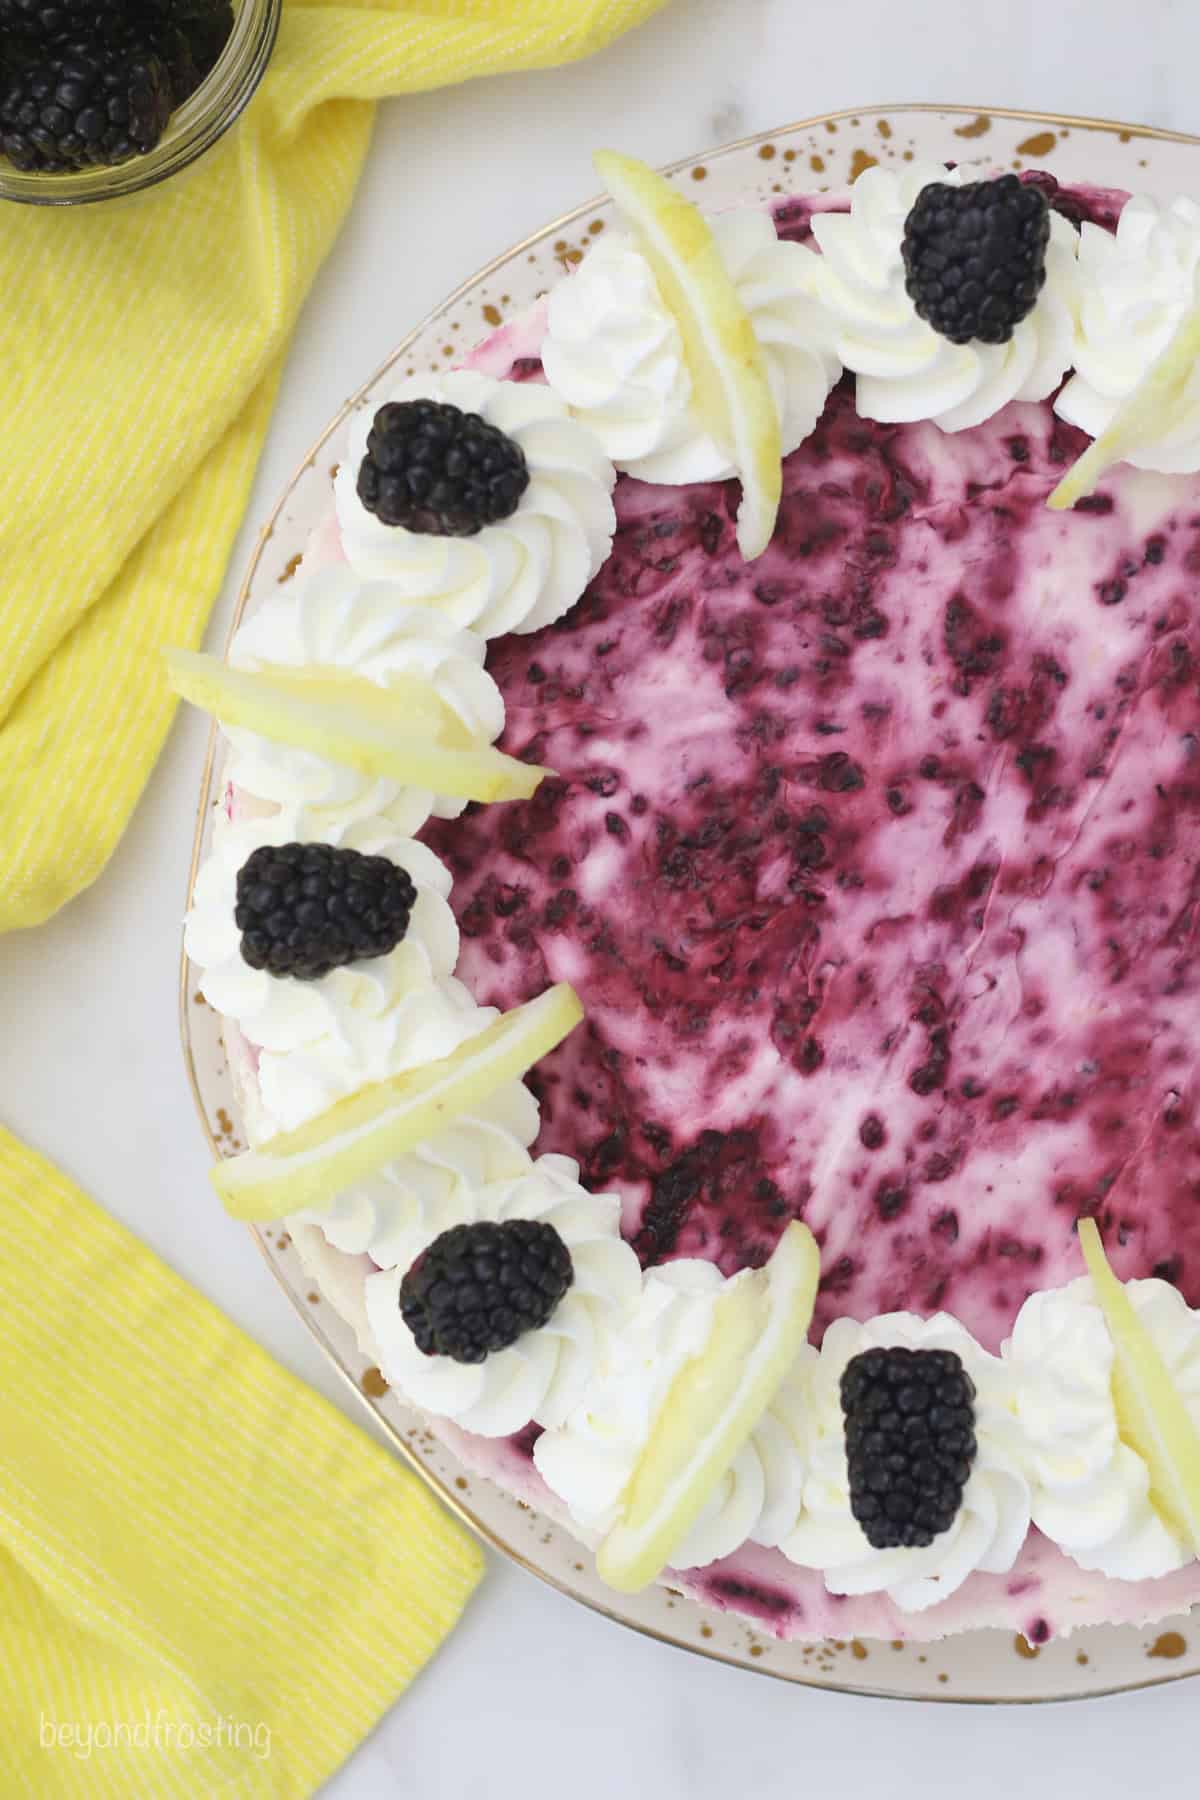 Overhead view of a blackberry lemon cheesecake decorated with swirls of whipped cream and garnished with lemon wedges and fresh blackberries.